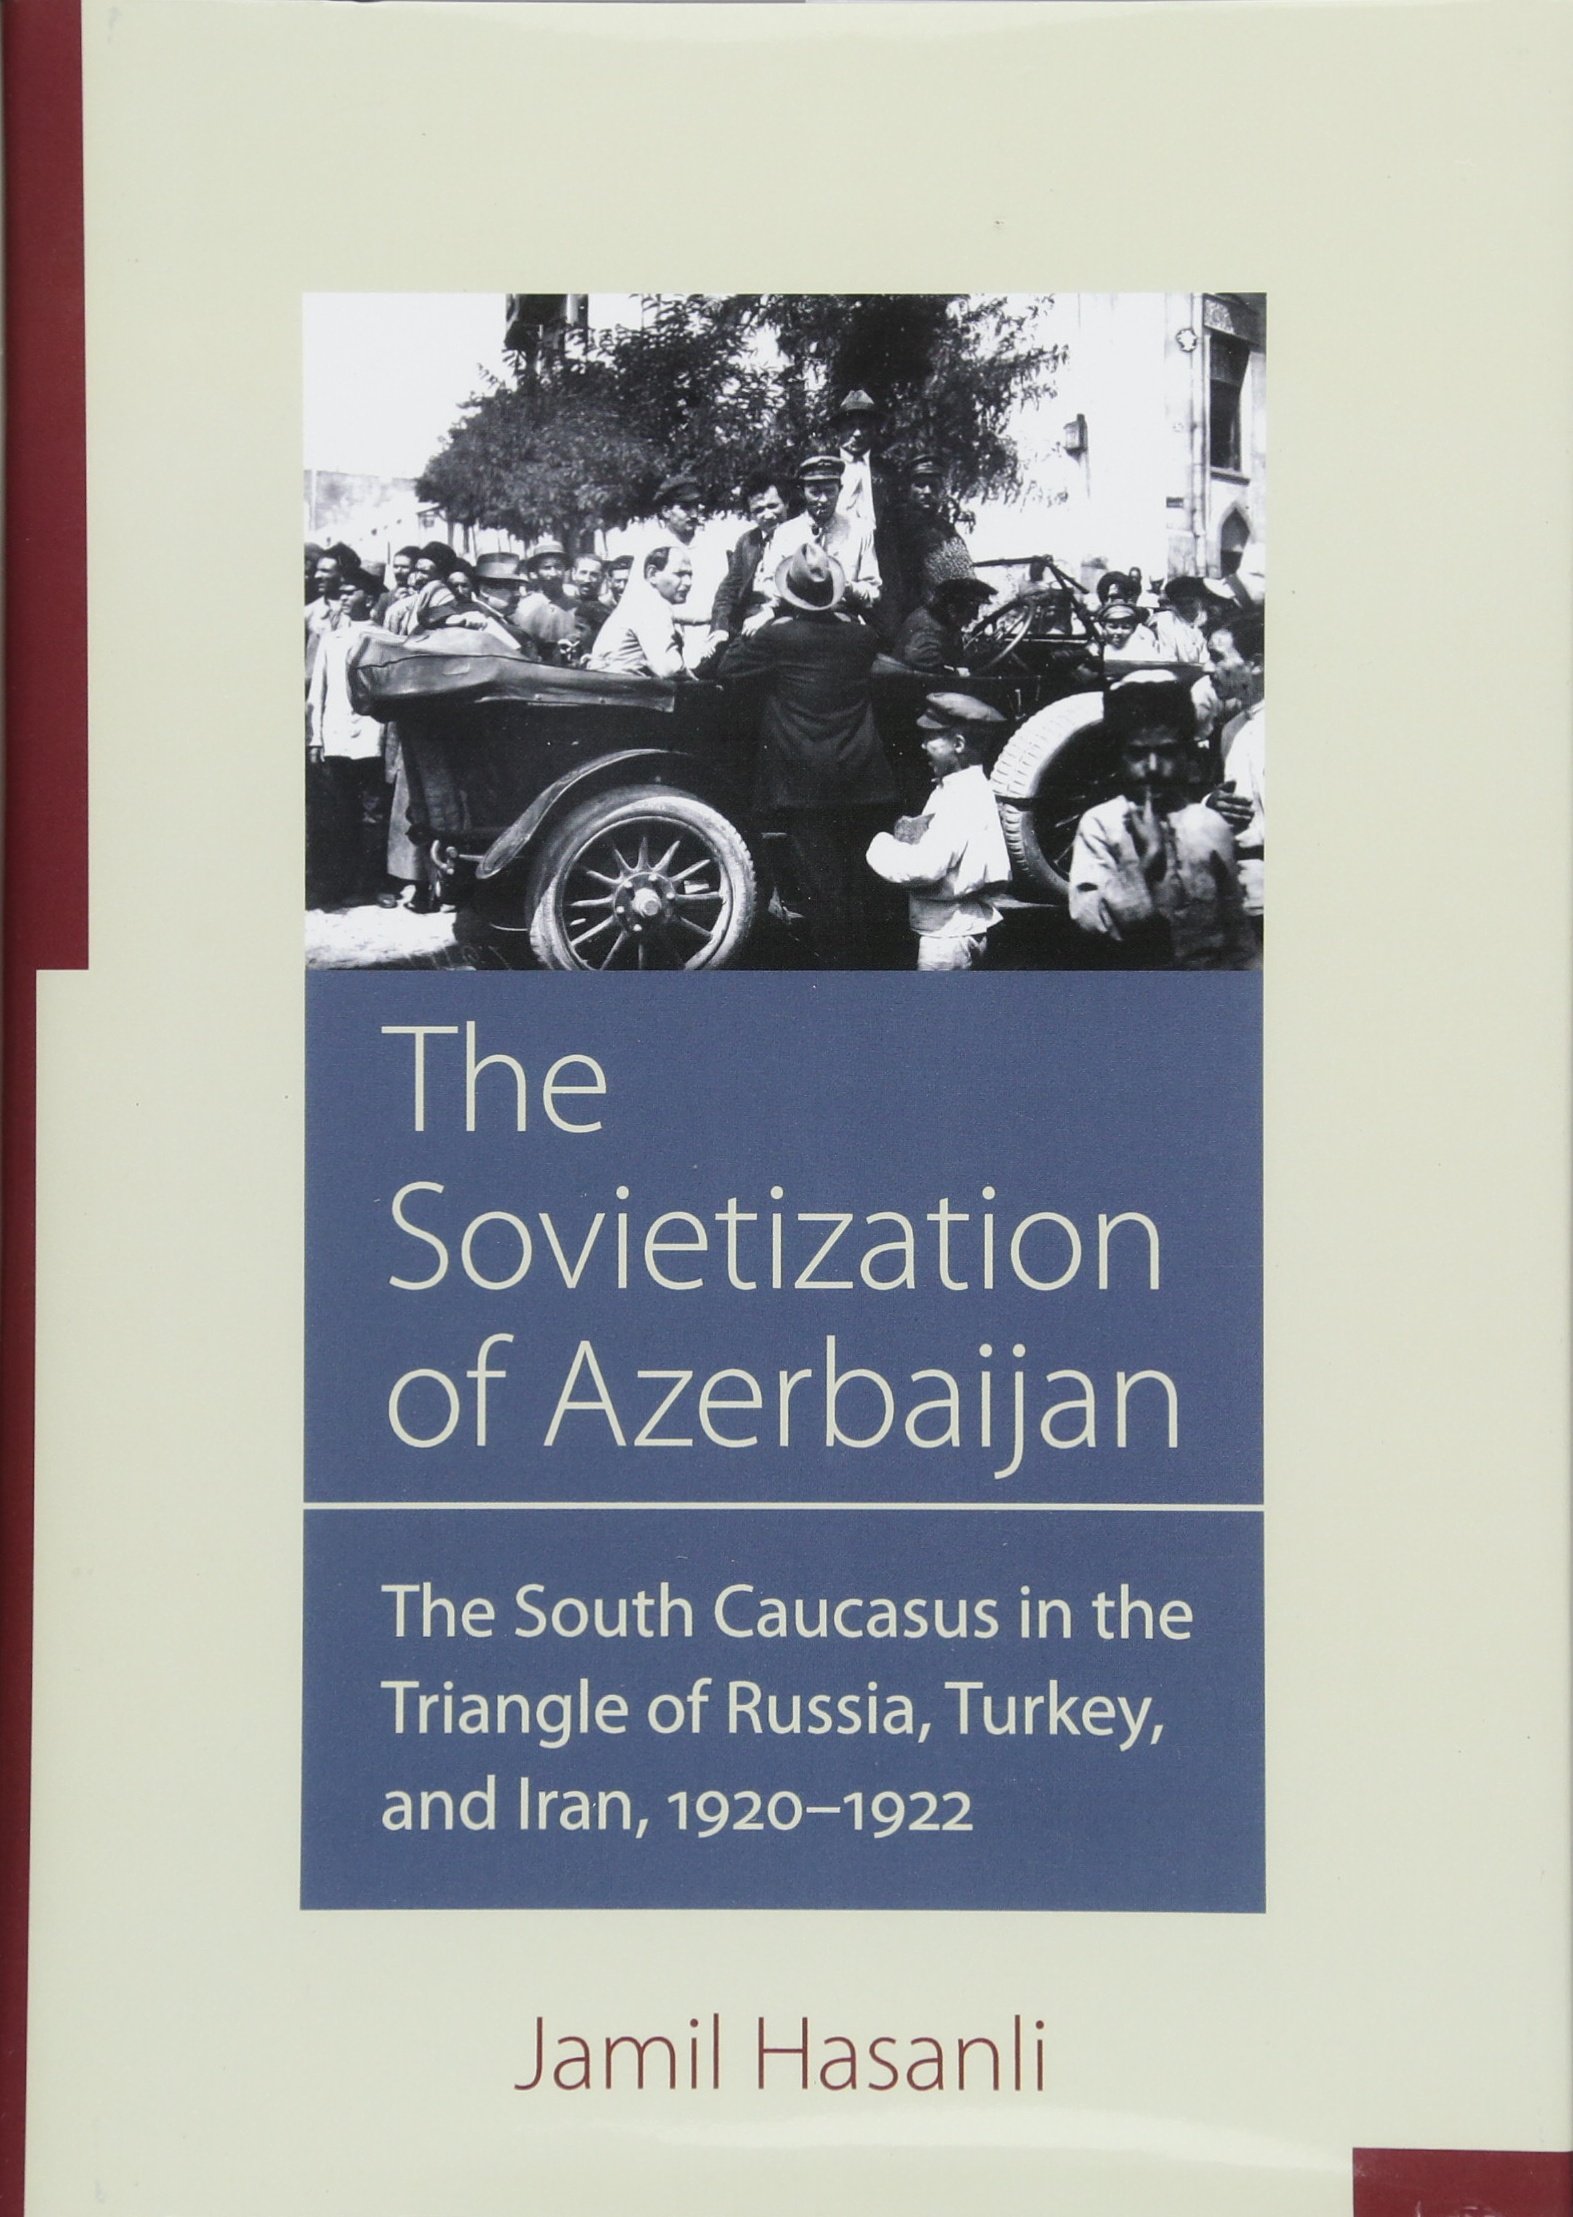 The Sovietization of Azerbaijan The South Caucasus in the Triangle